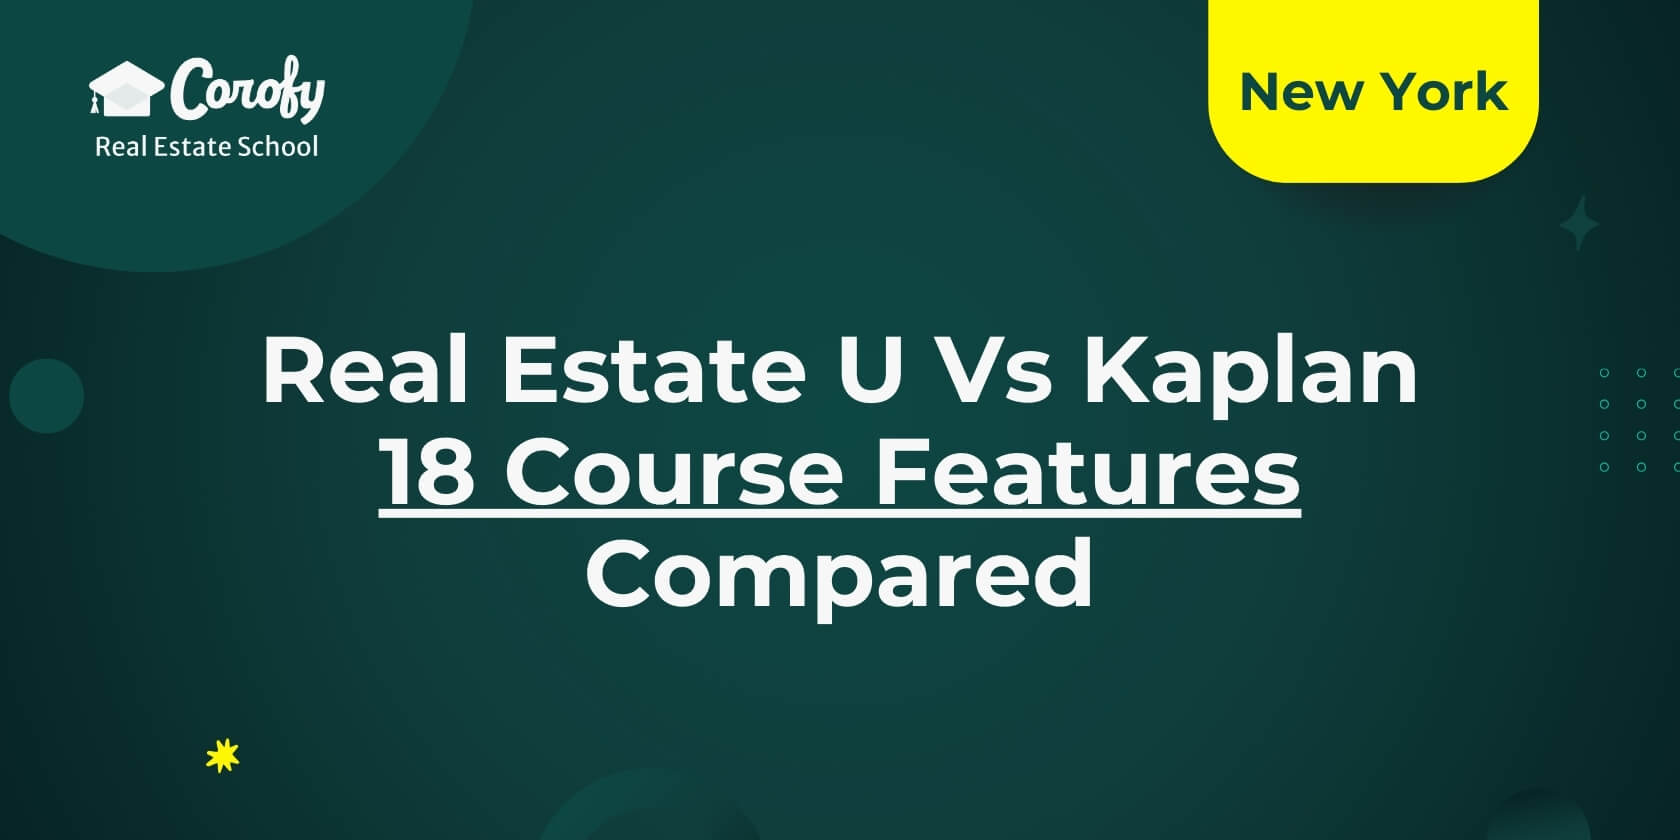 Real Estate U vs Kaplan - 18 Course Features Compared